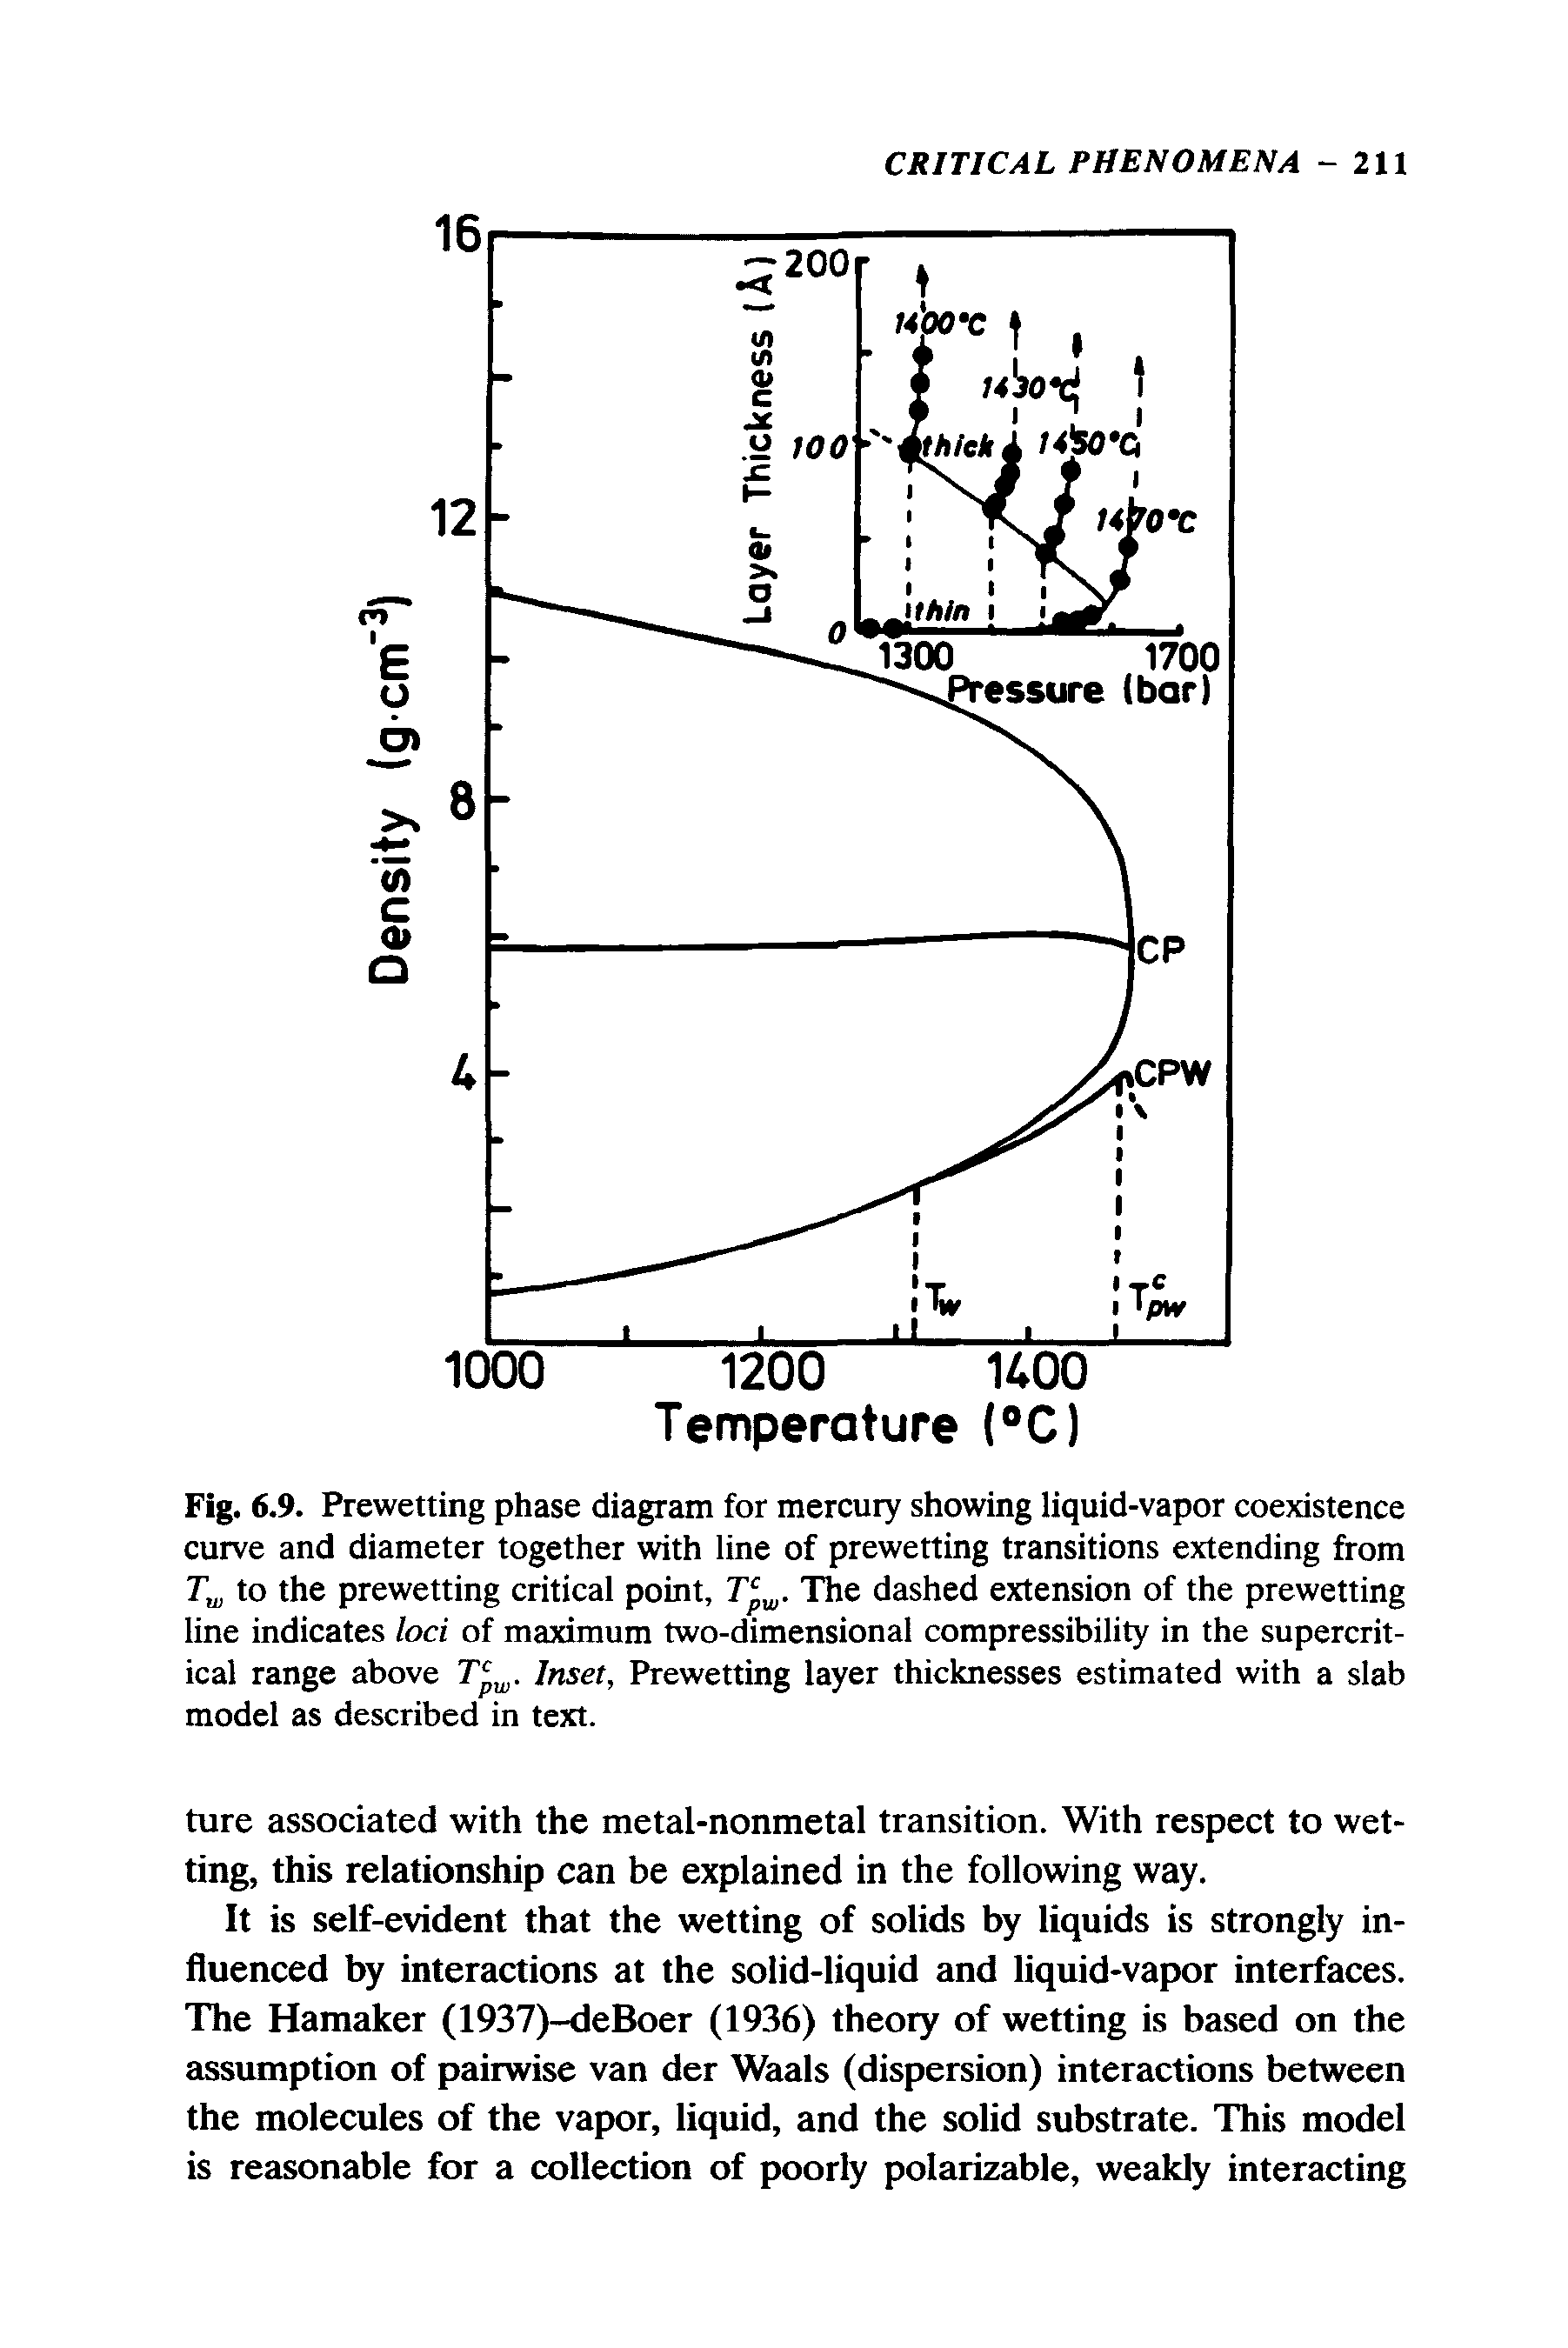 Fig. 6.9. Prewetting phase diagram for mercury showing liquid-vapor coexistence curve and diameter together with line of prewetting transitions extending from to the prewetting critical point, The dashed extension of the prewetting line indicates loci of maximum two-dimensional compressibility in the supercritical range above Inset, Prewetting layer thicknesses estimated with a slab model as described in text.